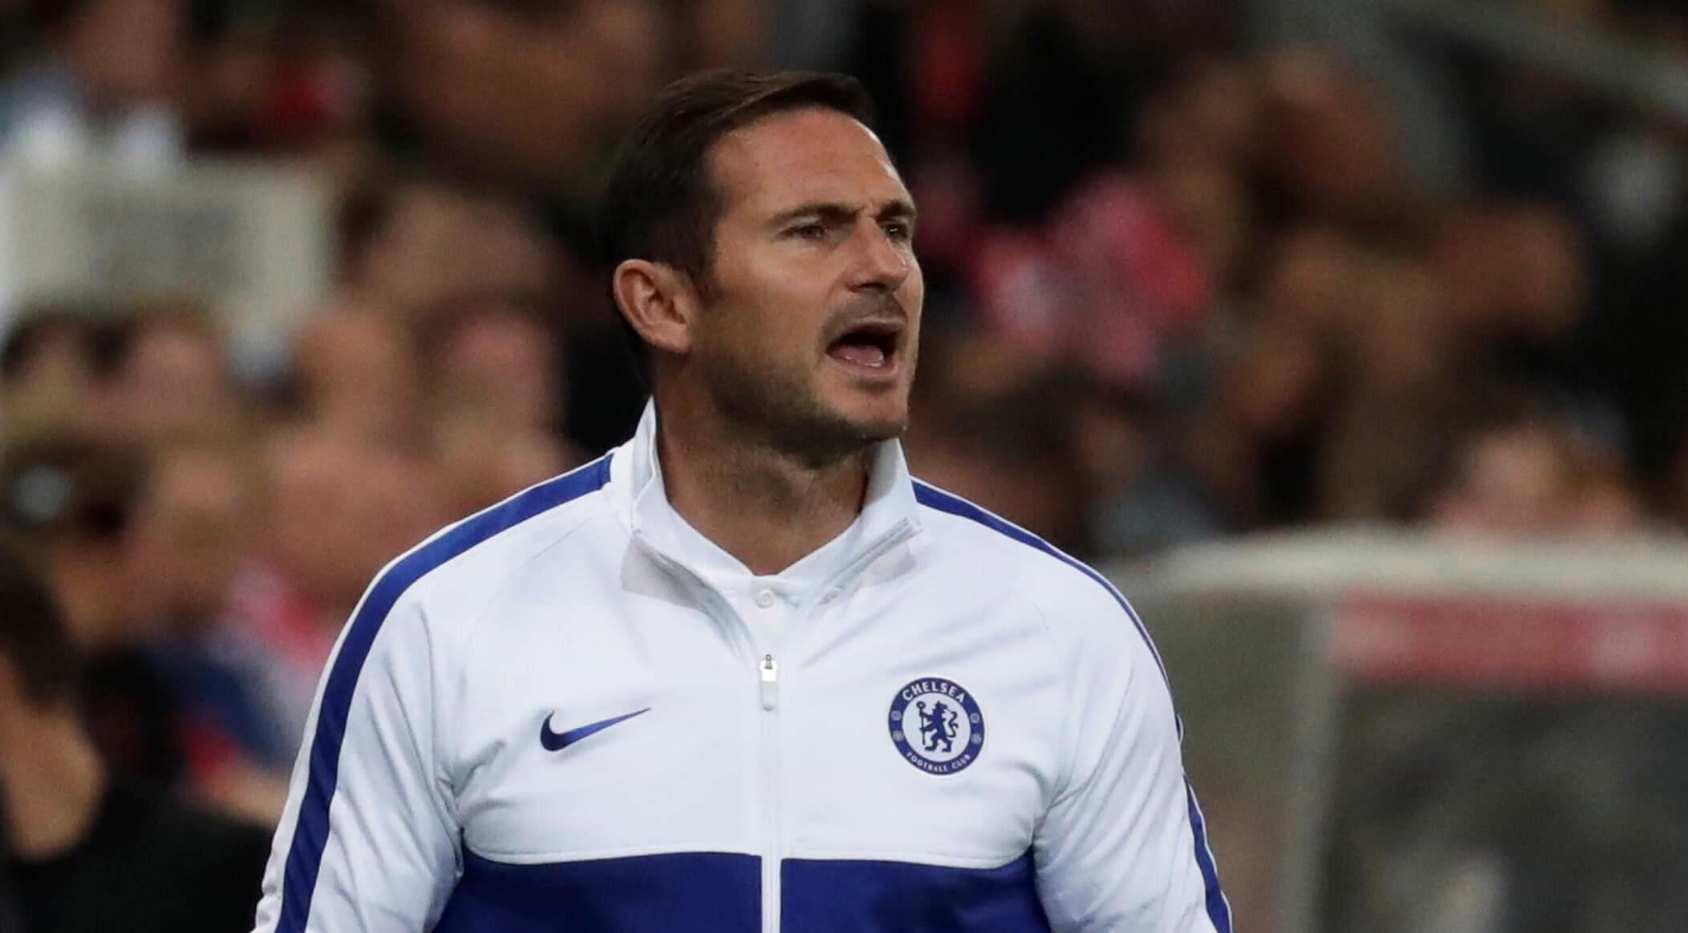 Frank Lampard clears air on resigning as Chelsea manager